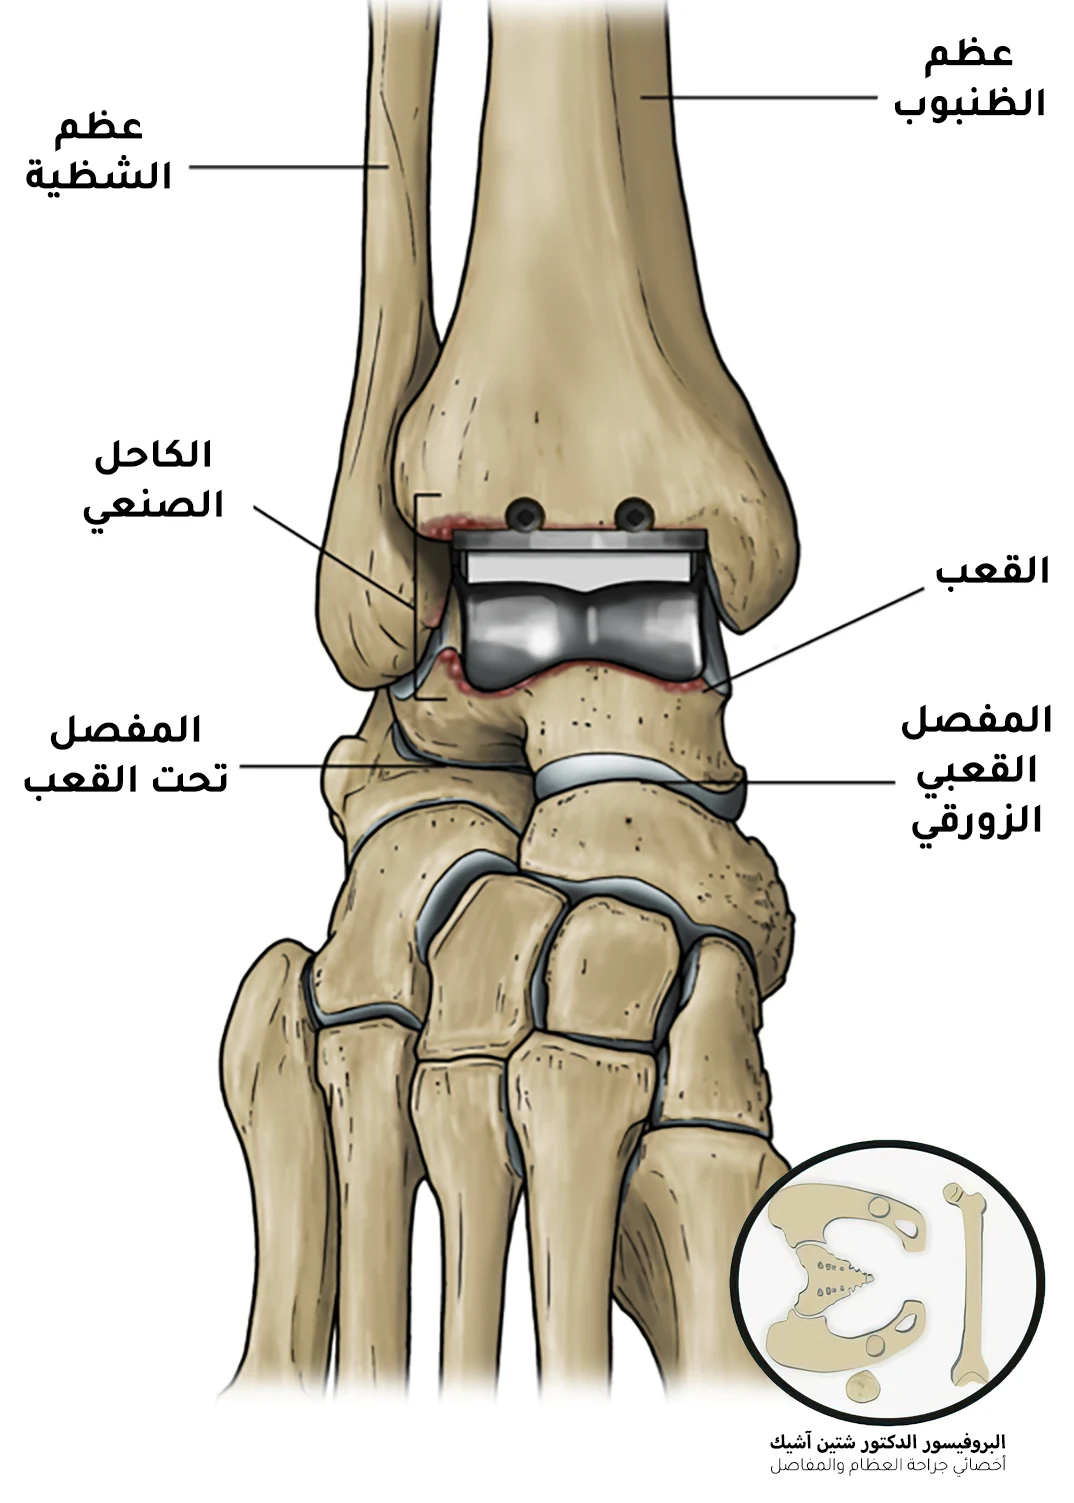 Image showing the prosthetic foot joint after its installation